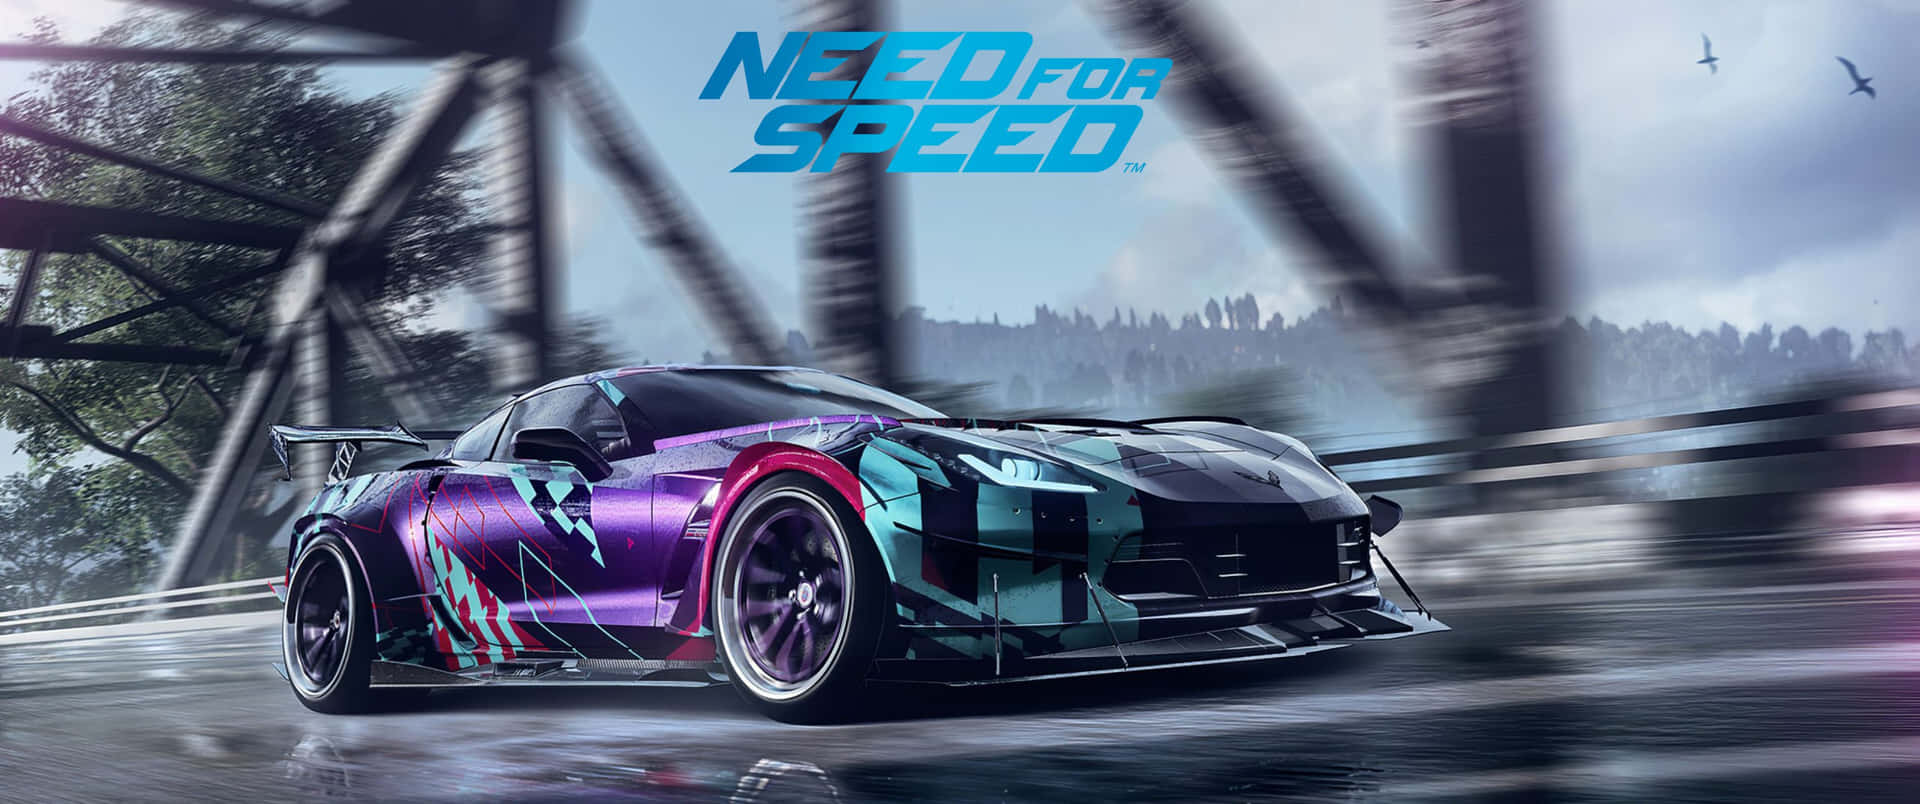 The thrills of Need For Speed in full 3440x1440p display!